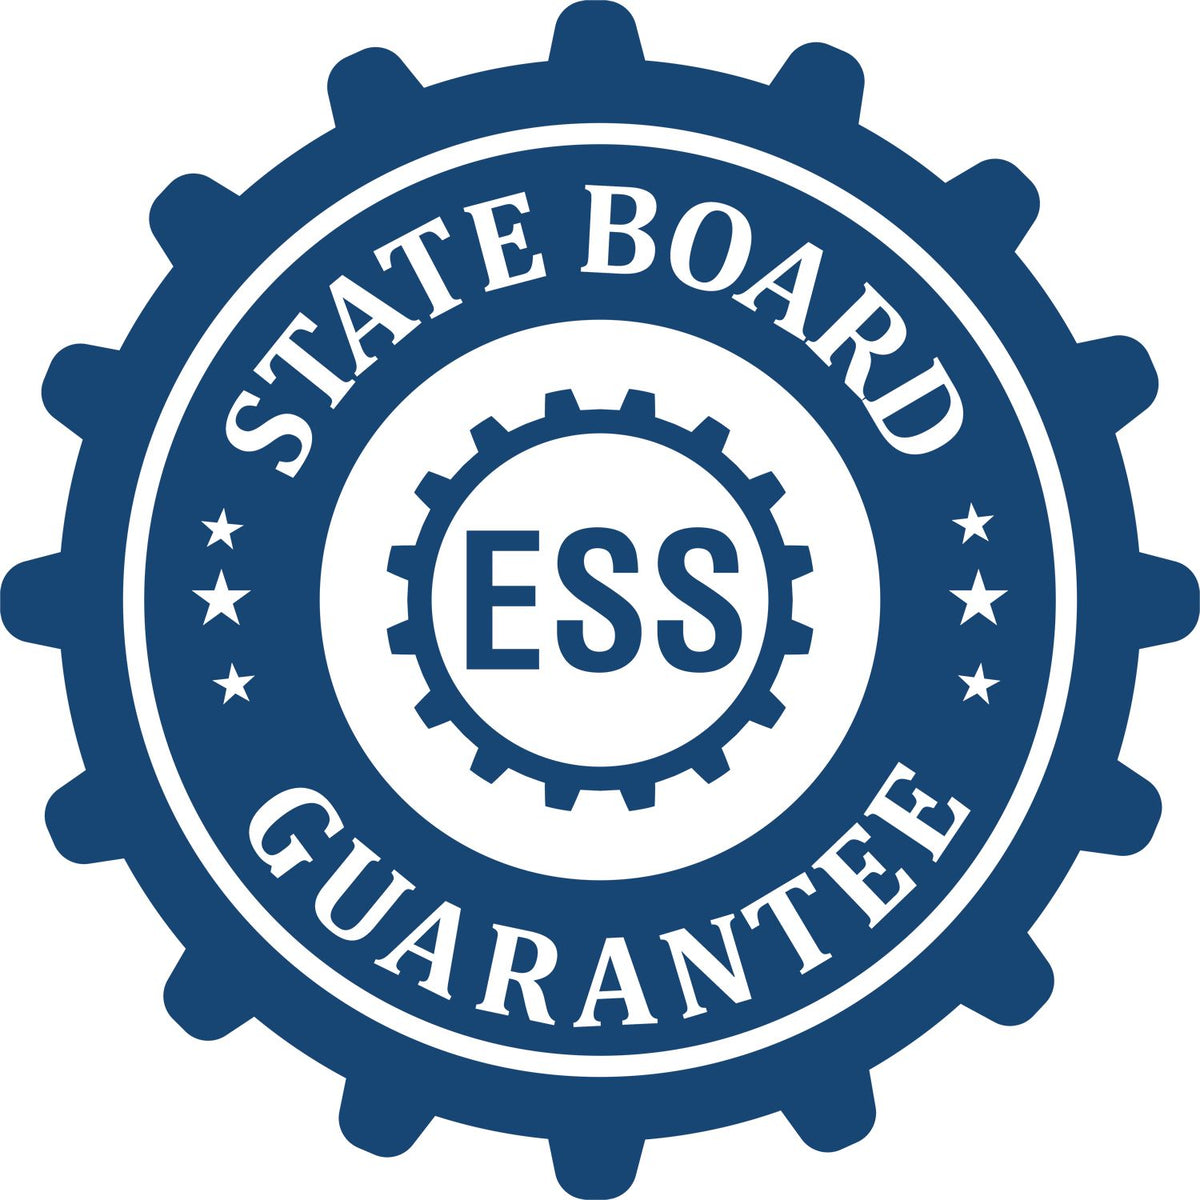 An emblem in a gear shape illustrating a state board guarantee for the Digital Indiana Geologist Stamp, Electronic Seal for Indiana Geologist